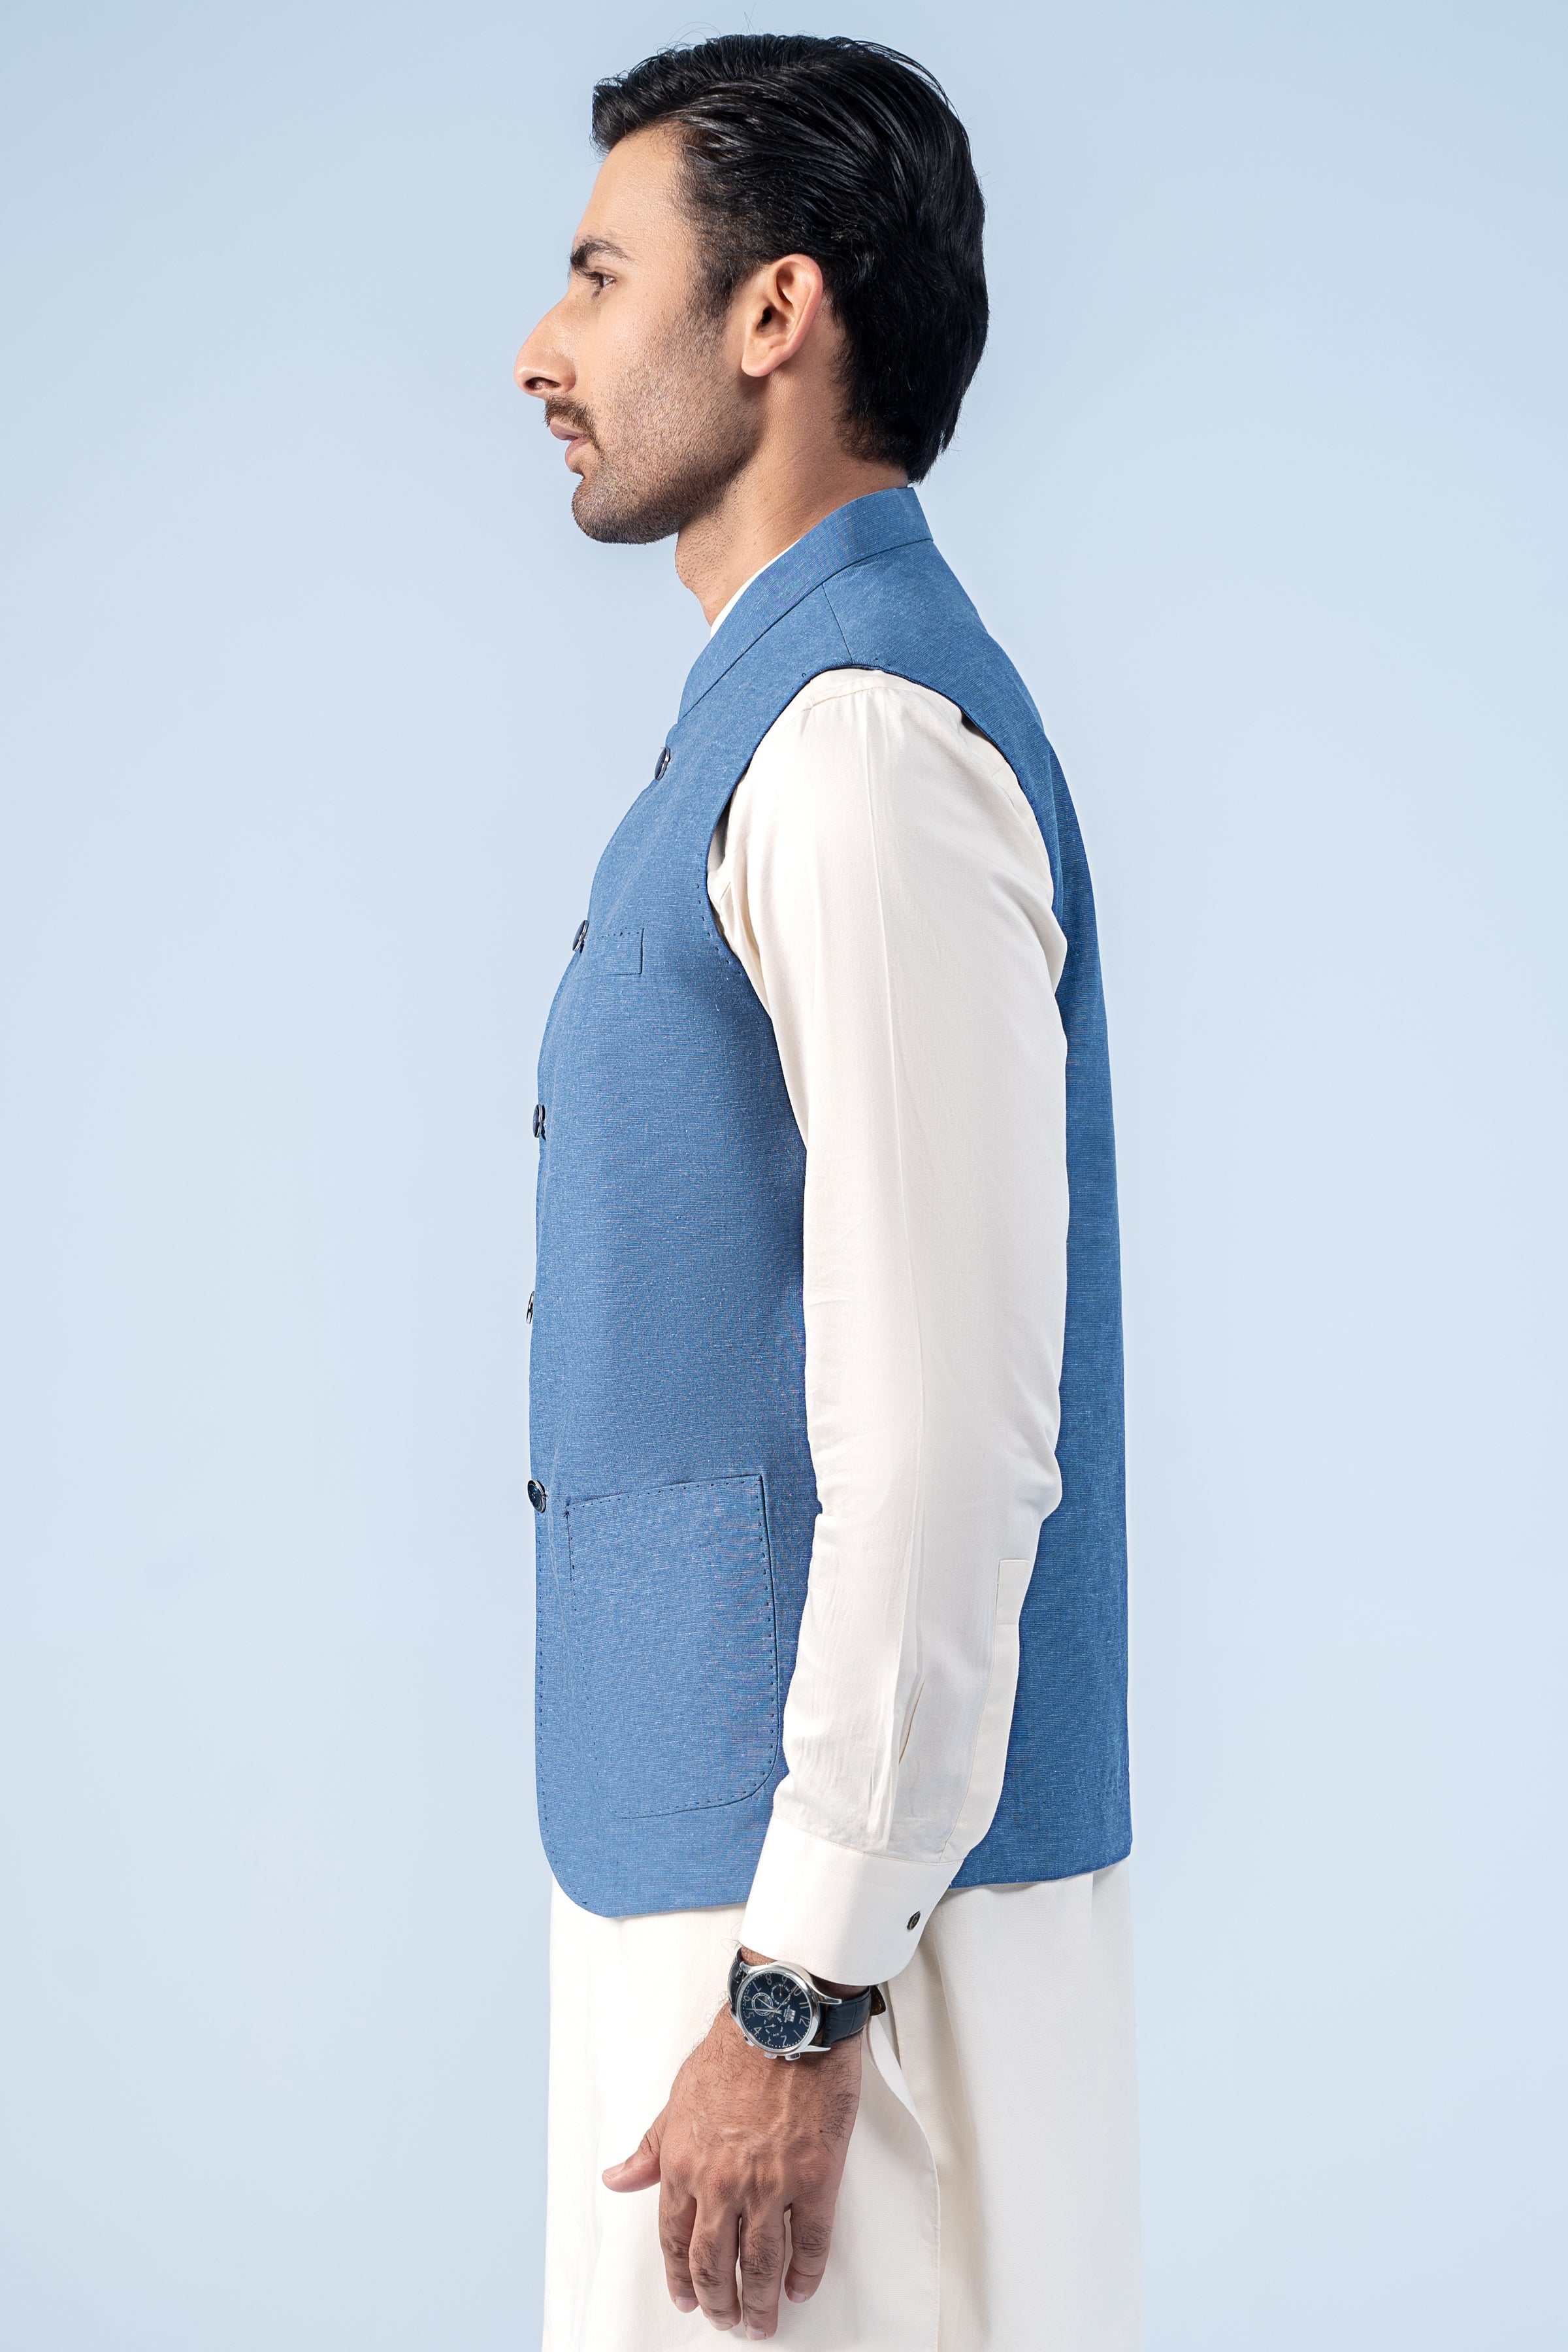 WAISTCOAT BLUE TEXTURED - Charcoal Clothing